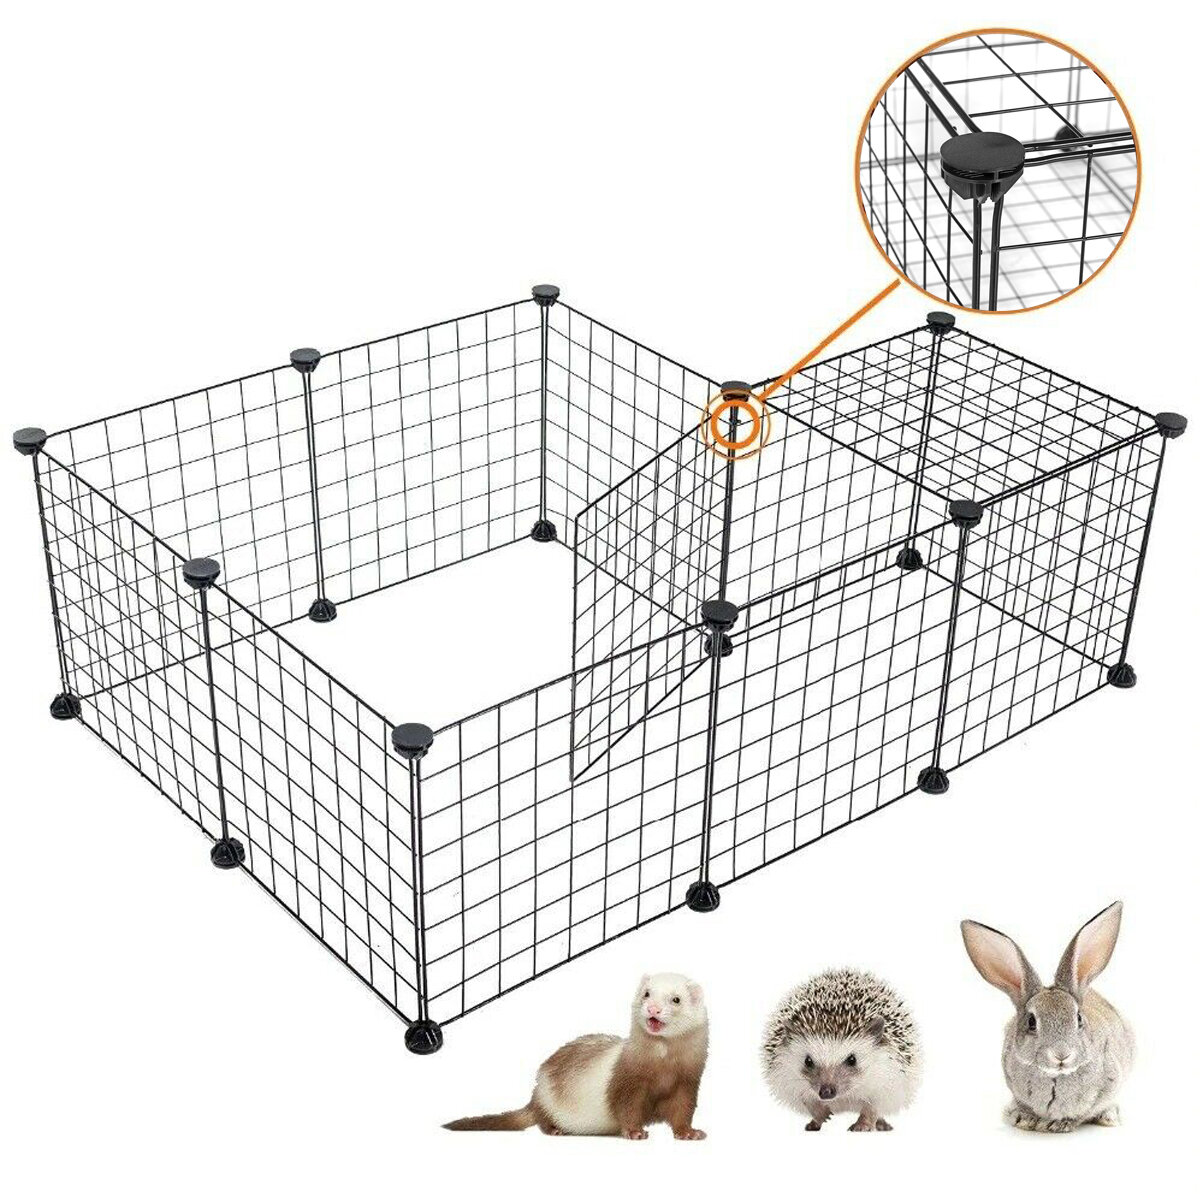 Foldable Pet Playpen Iron Fence Puppy Kennel House Exercise Training Puppy Space Dog-heyidear